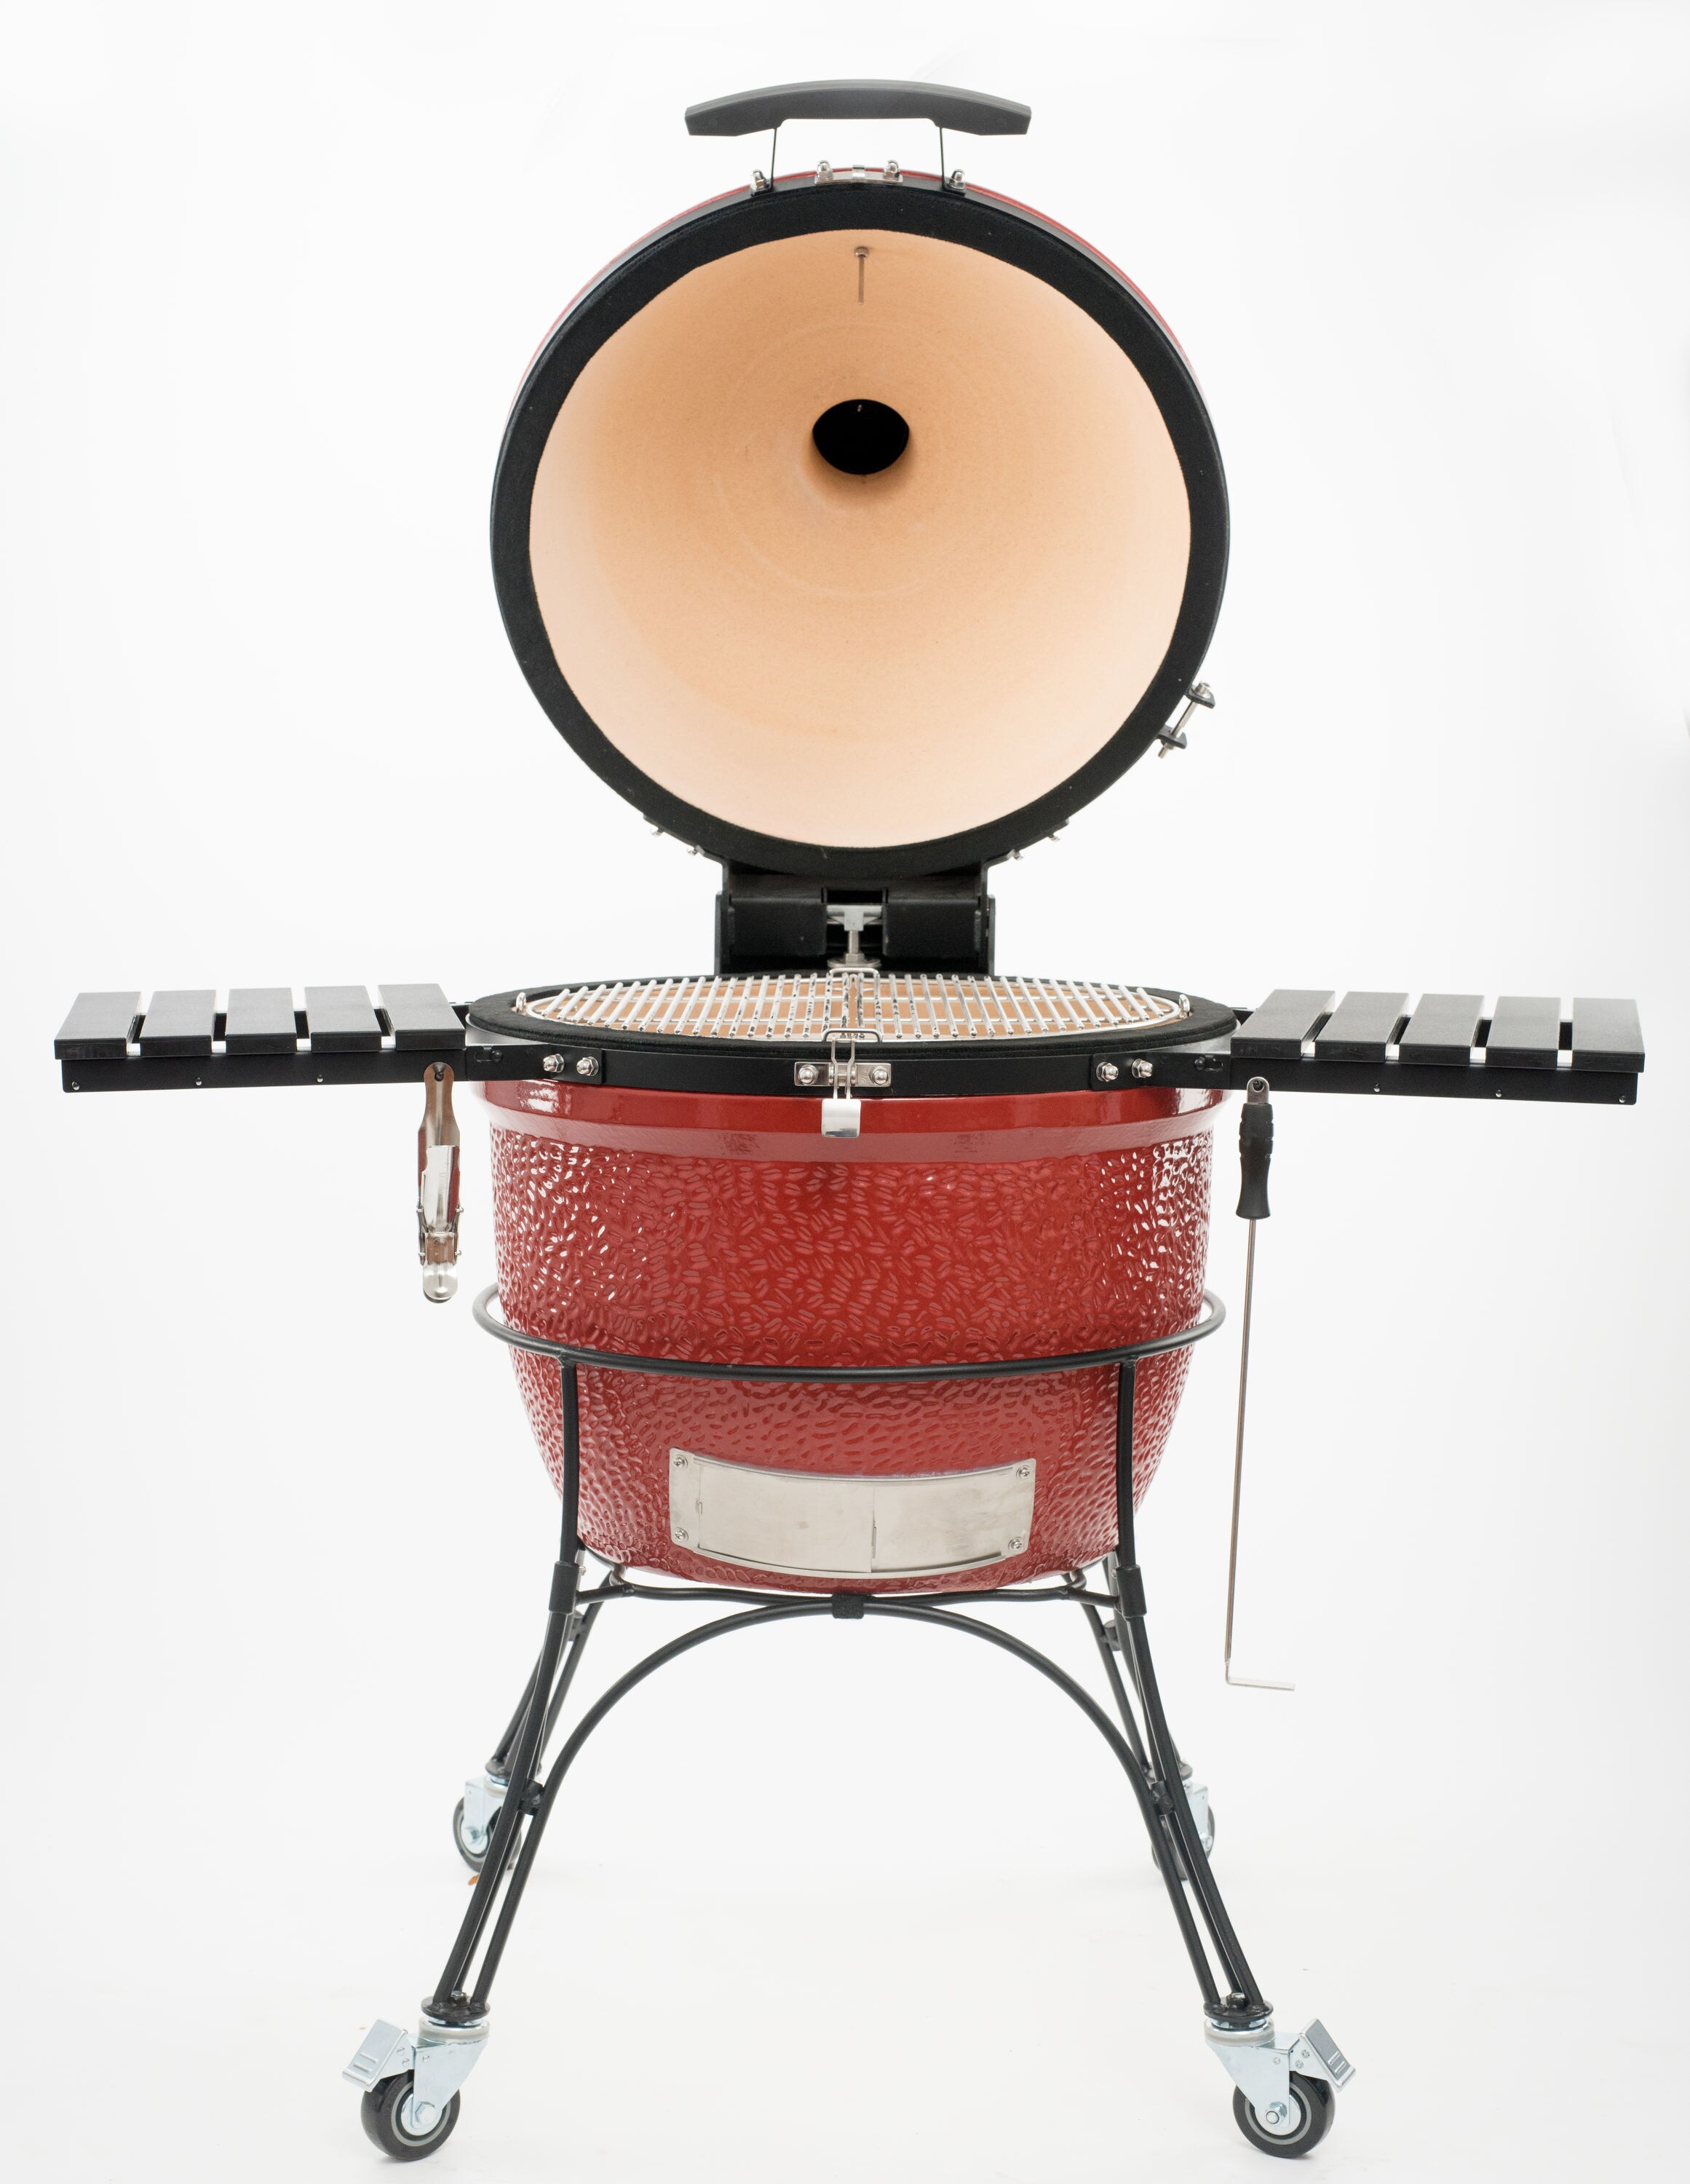 Joe Classic 18-in W Blaze Red Kamado Charcoal Grill in the Charcoal Grills department at Lowes.com